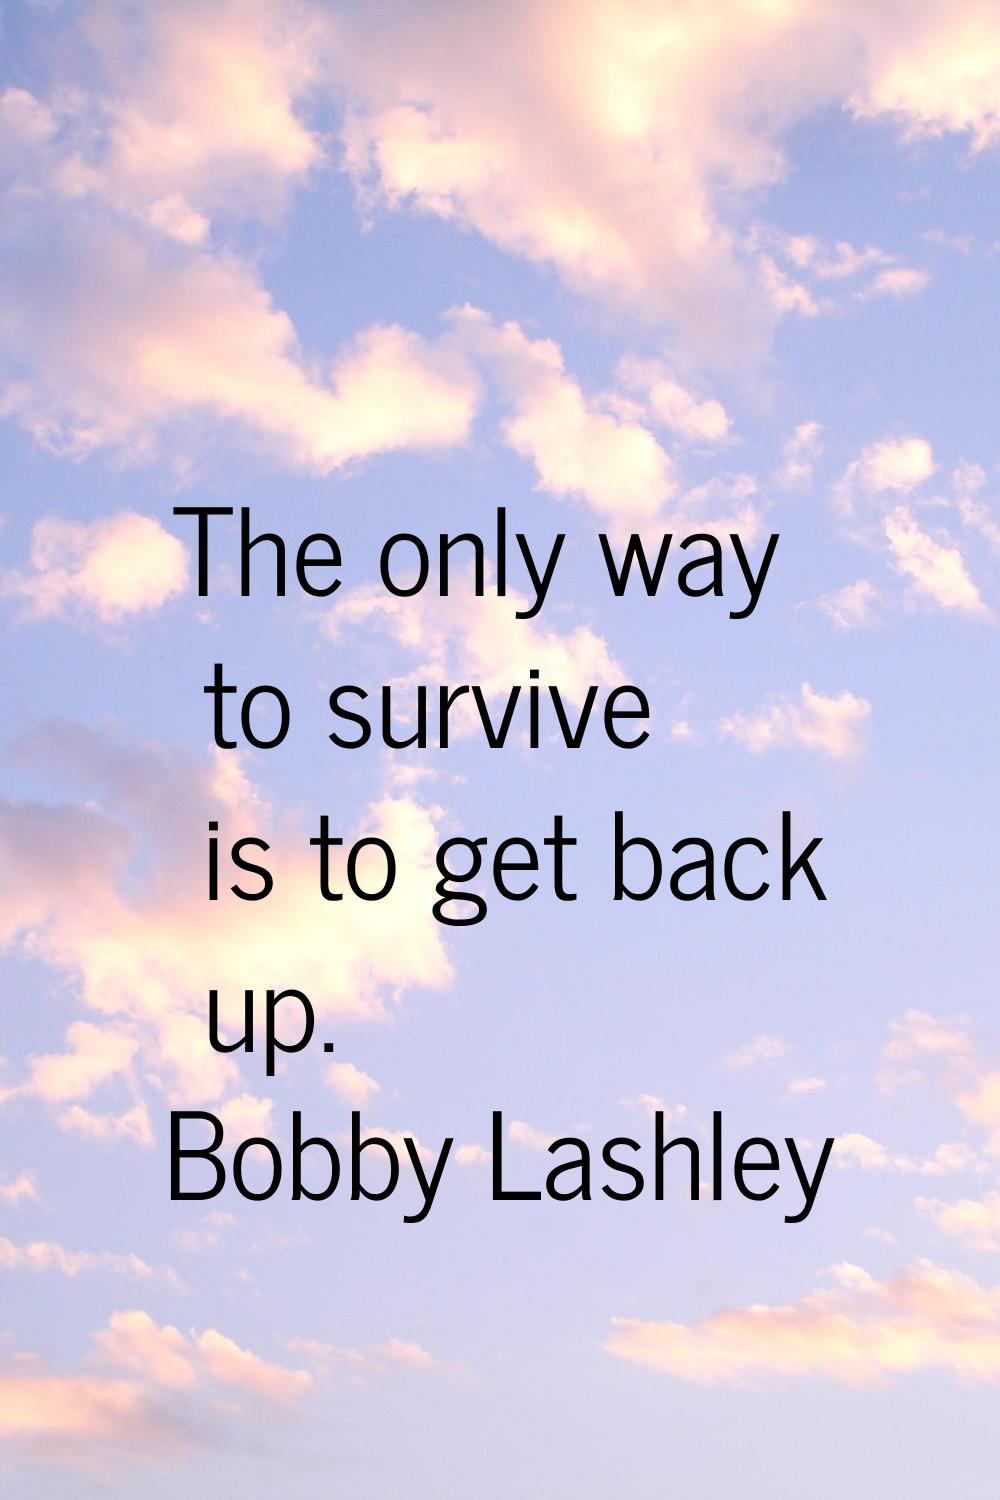 The only way to survive is to get back up.